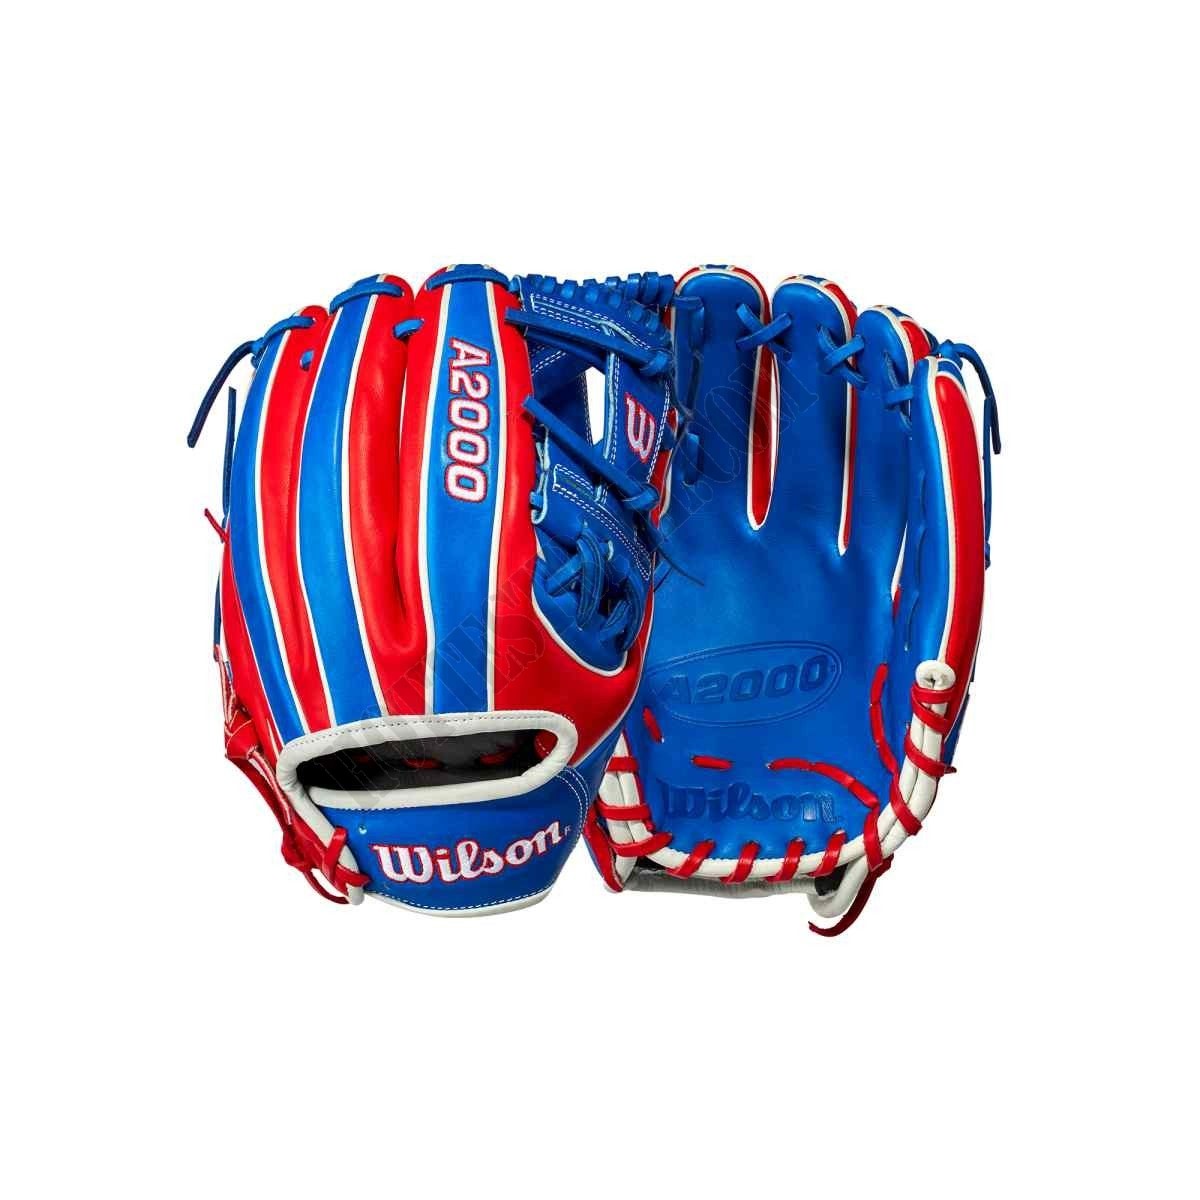 2021 A2000 1786 Dominican Republic 11.5" Infield Baseball Glove - Limited Edition ● Wilson Promotions - 2021 A2000 1786 Dominican Republic 11.5" Infield Baseball Glove - Limited Edition ● Wilson Promotions